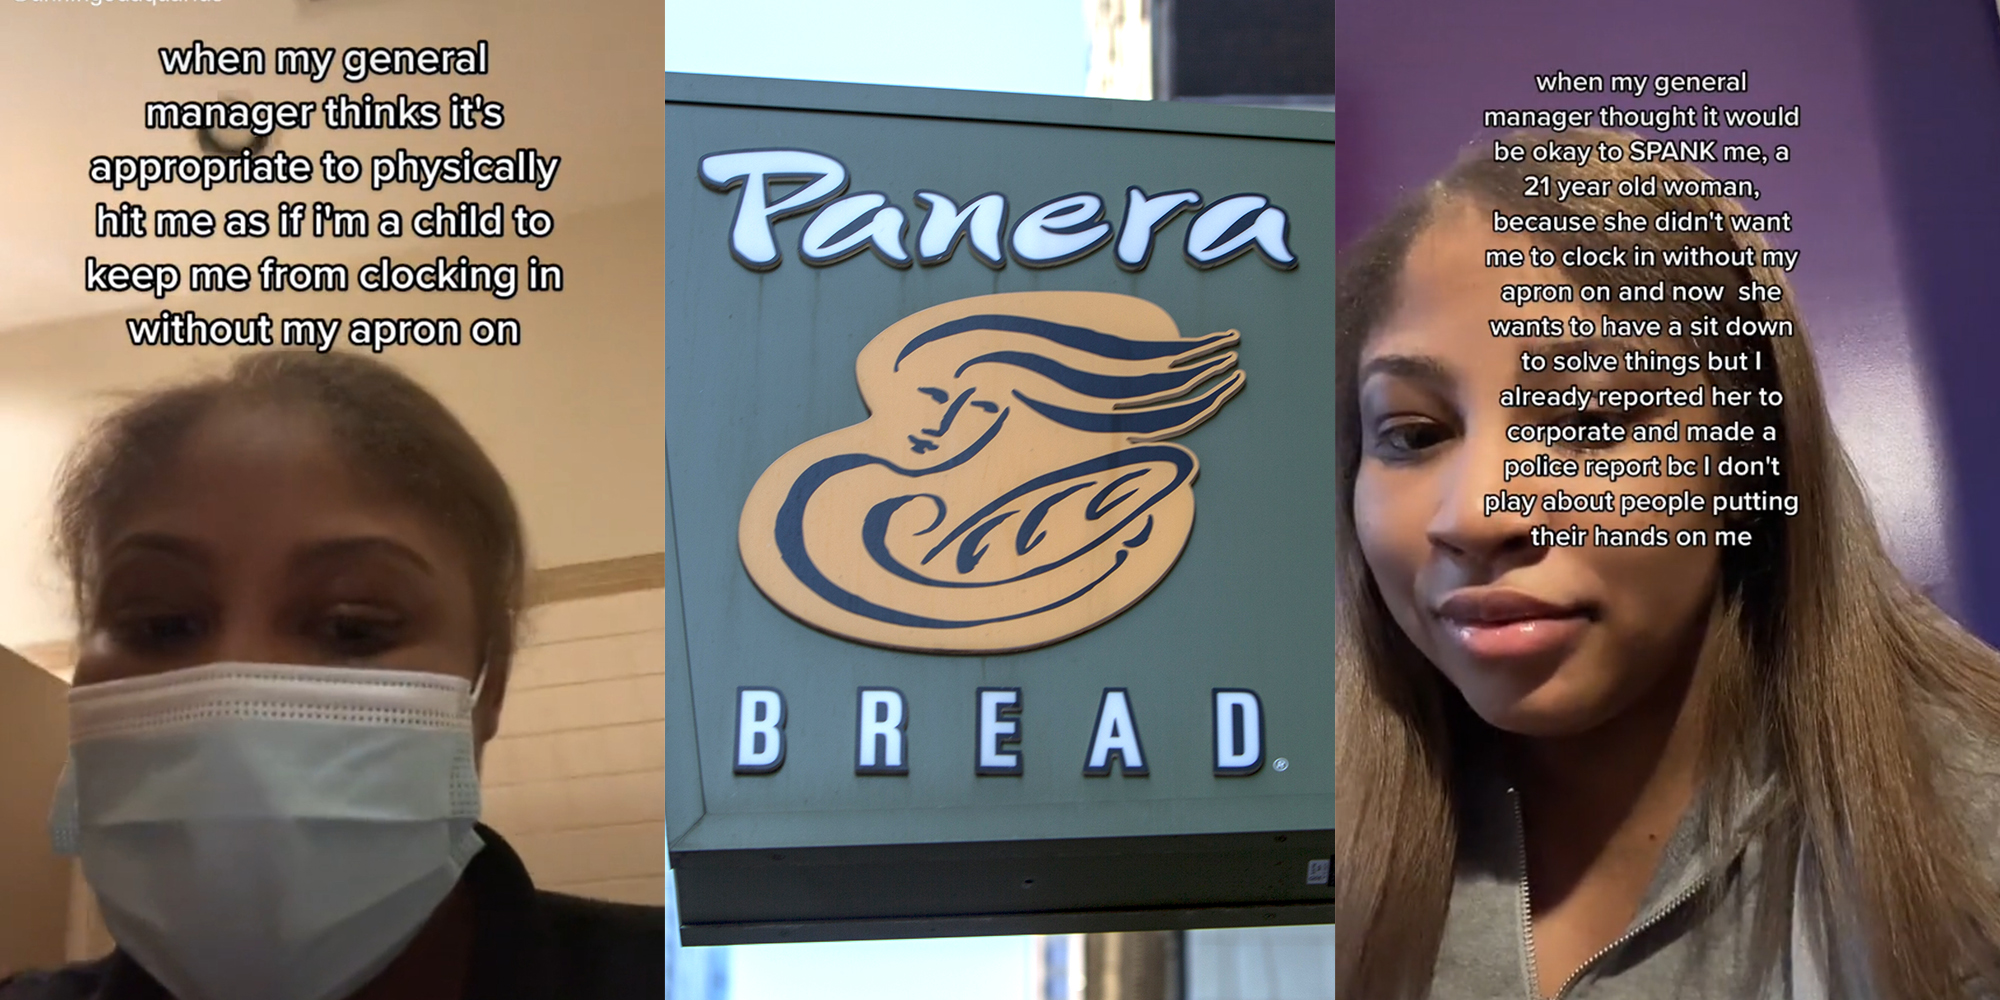 21-Year-Old Worker Says Her Manager at Panera Spanked